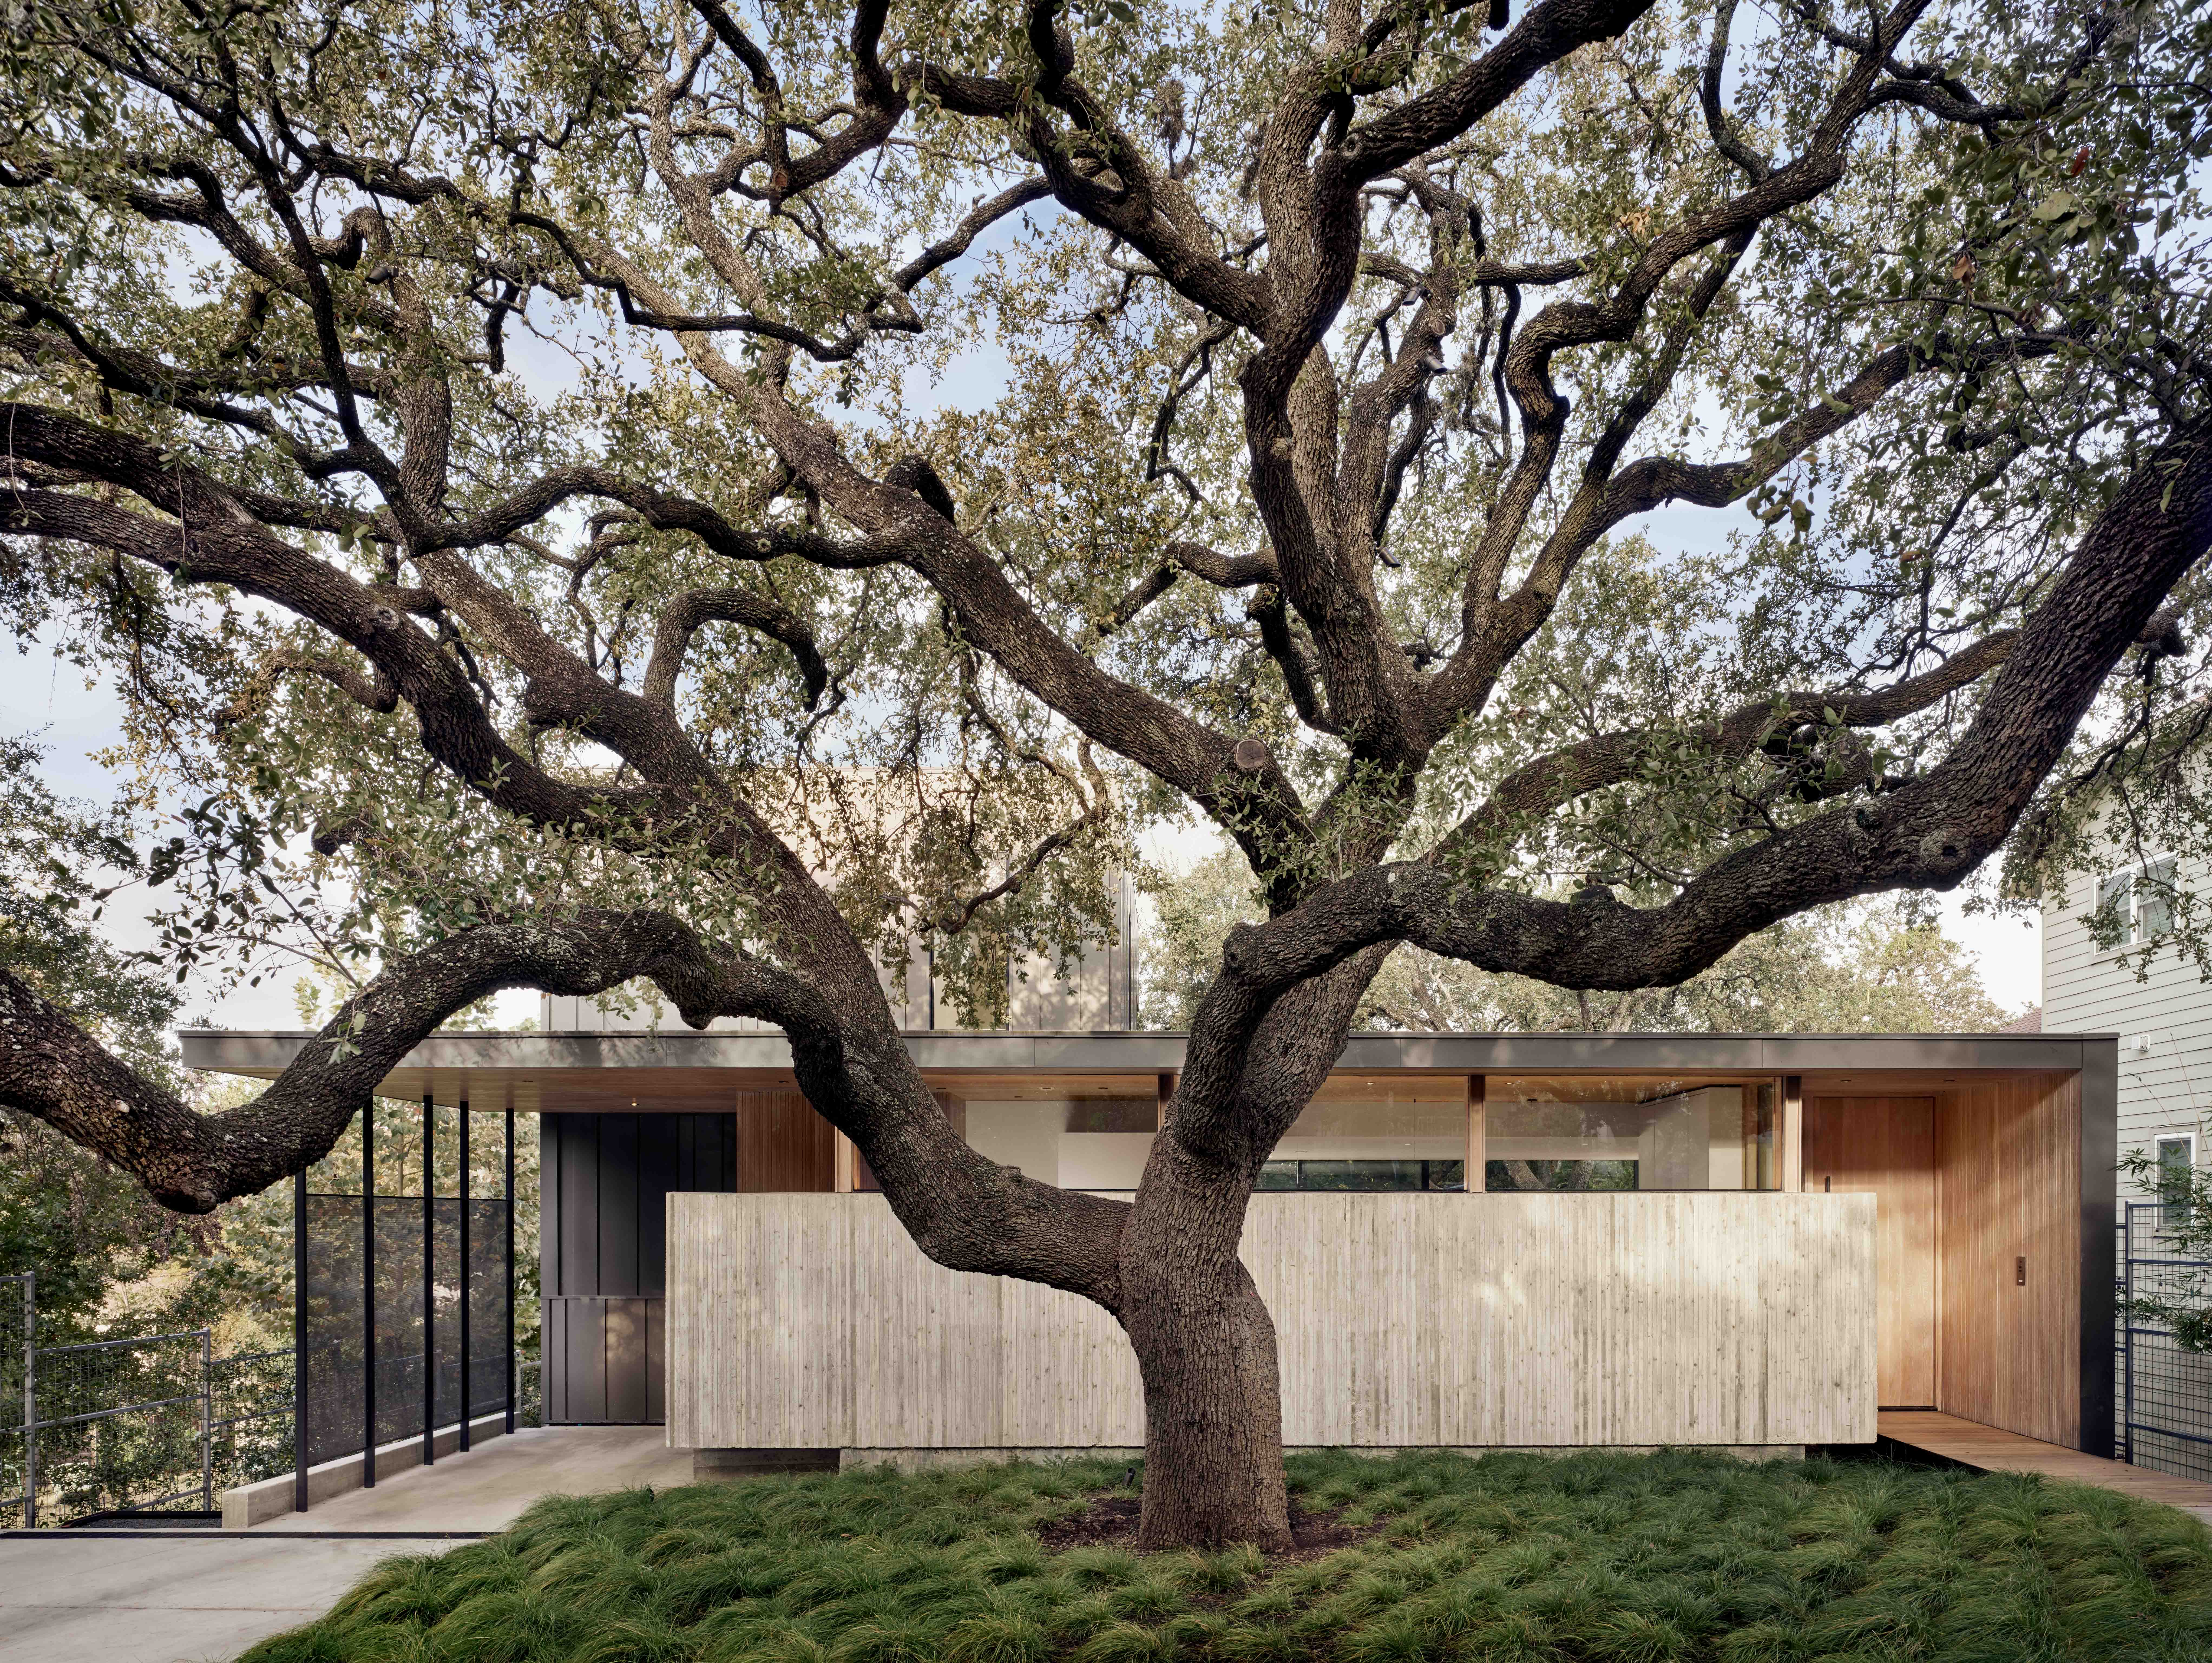 Exterior shot of the Alta Vista Residence with a towering oak tree in front of the home.